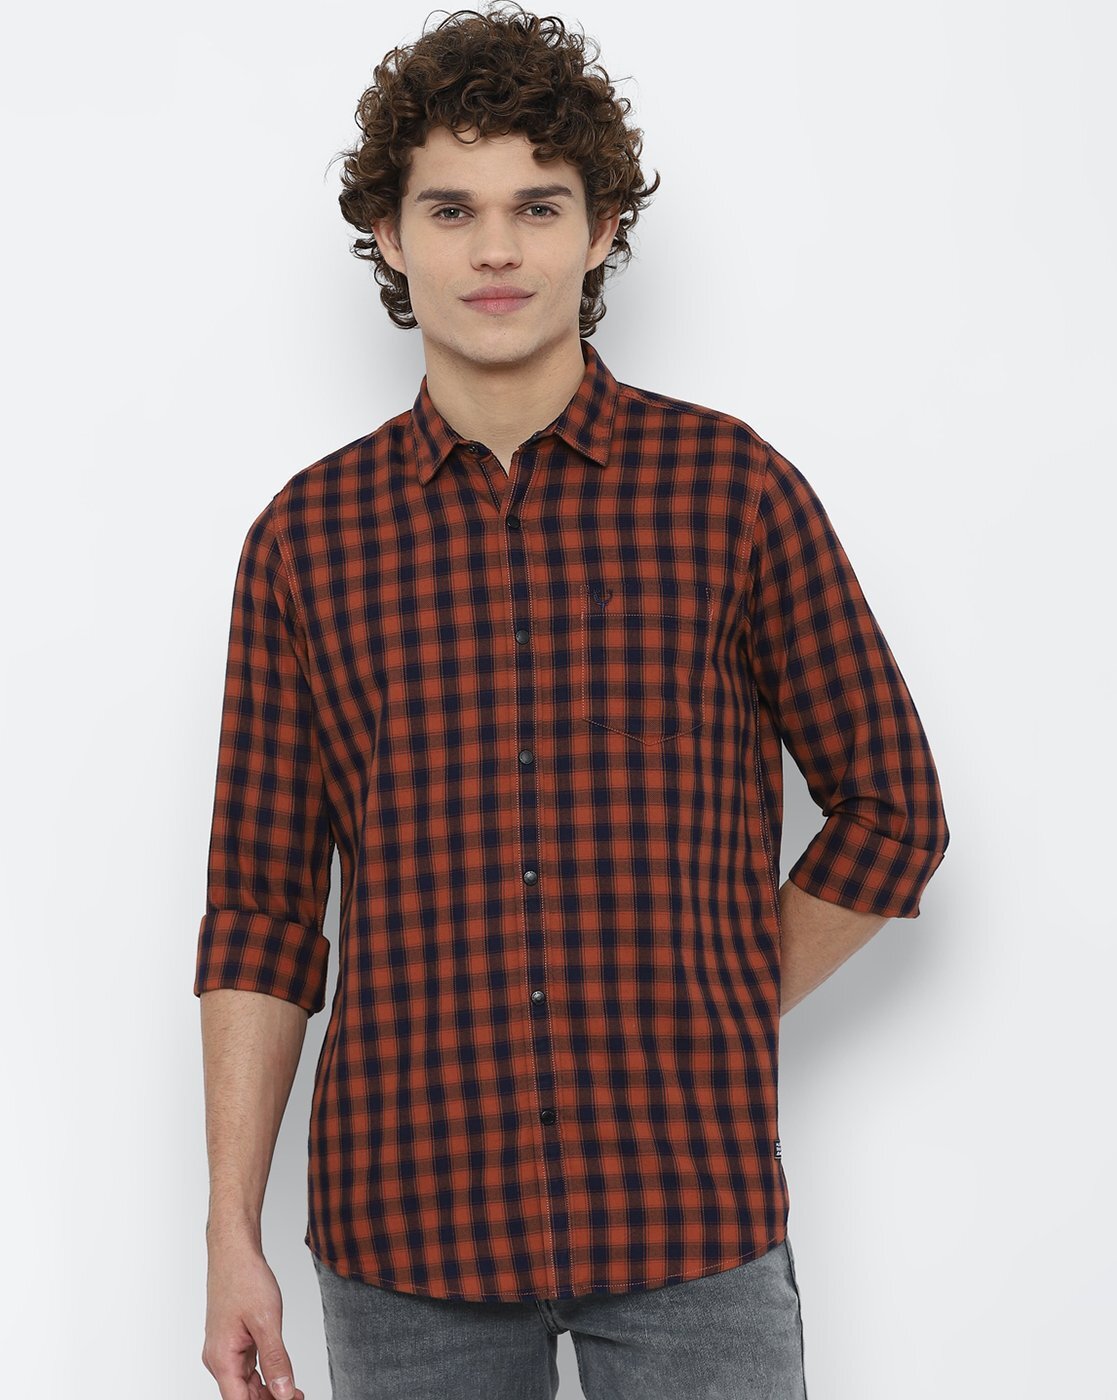 Allen Solly Checked Shirts - Buy Allen Solly Checked Shirts online